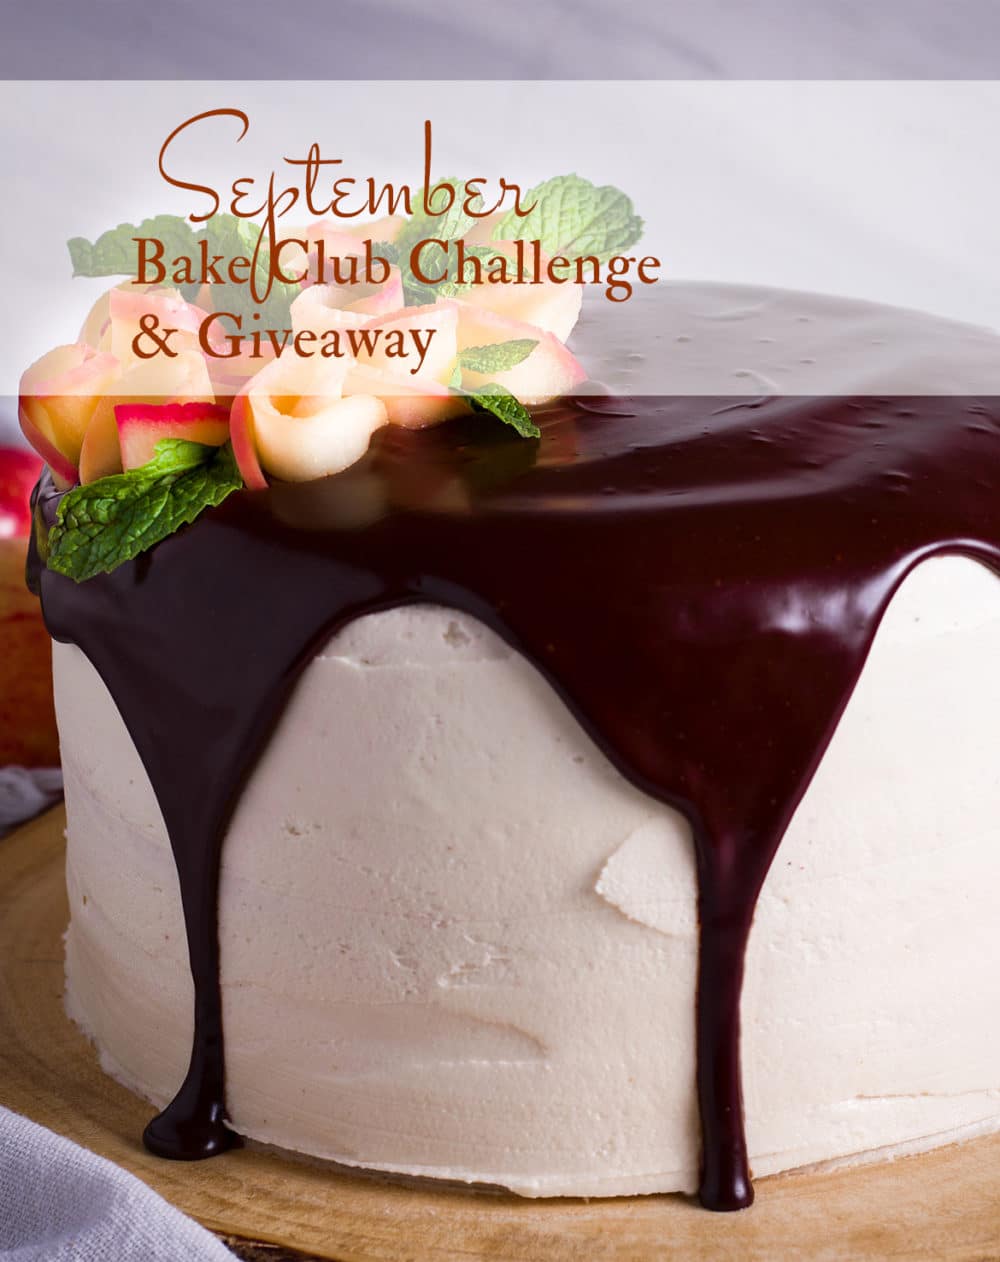 The September Bake Club Challenge is Apple Cake with Cider Buttercream